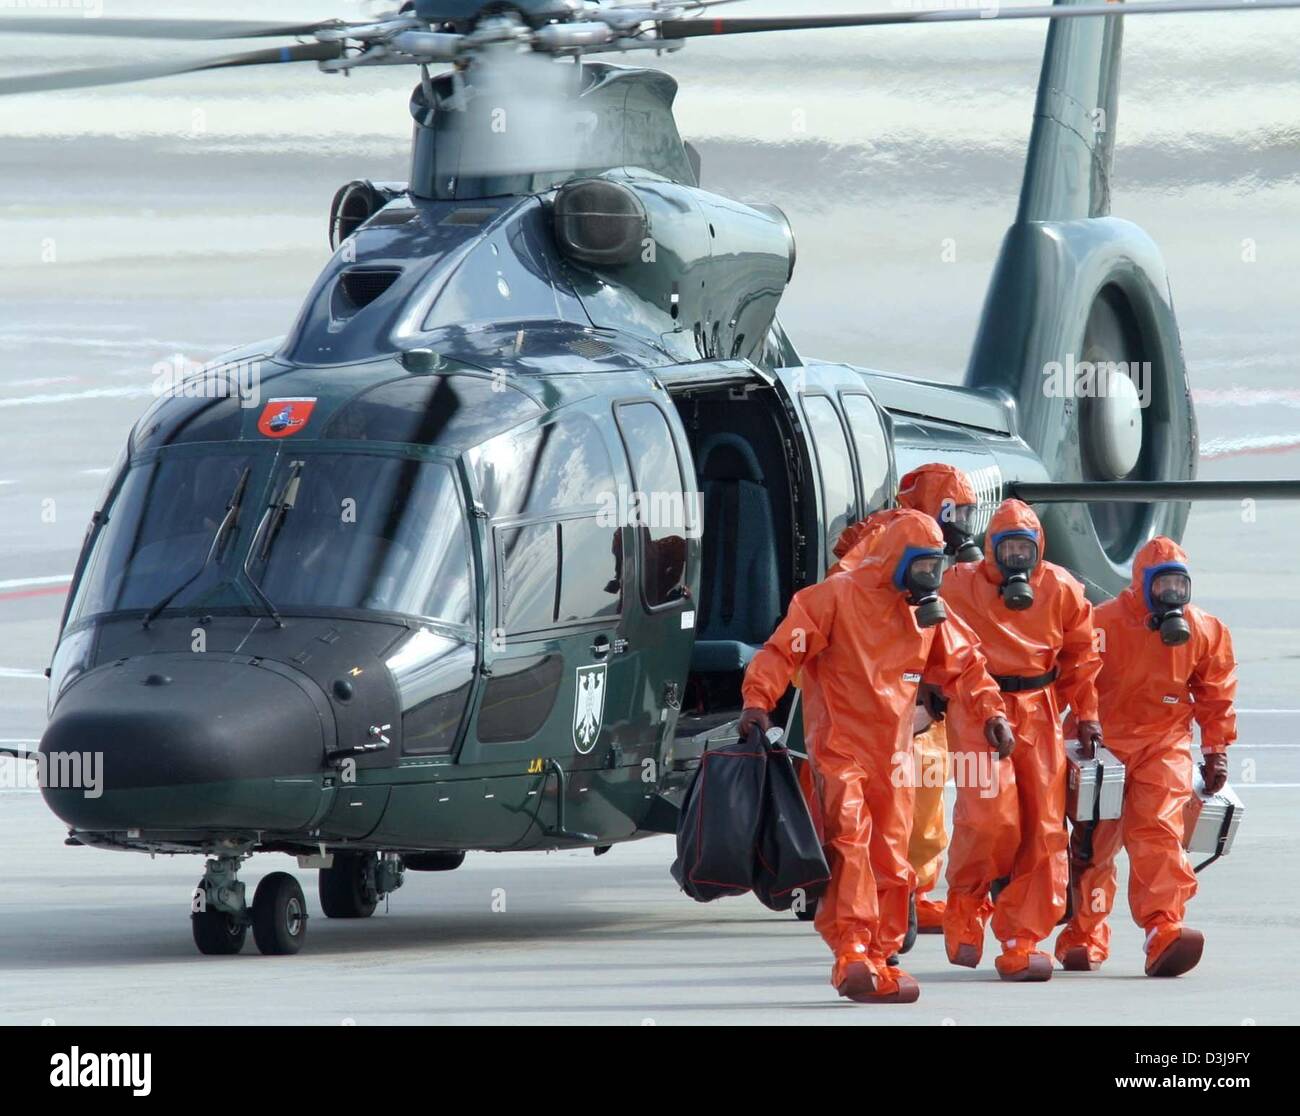 (dpa) - Experts of the Federal Border Guards (BGS), dressed in protective orange clothing walk away from a chopper after arriving at the airport during a safety and security exercise in Frankfurt Main, Germany, 31 March 2004. The joined exercise of the Federal Border Guard, customs, the fire brigade and the government agency for radiation protection took place under the name 'Hawke Stock Photo